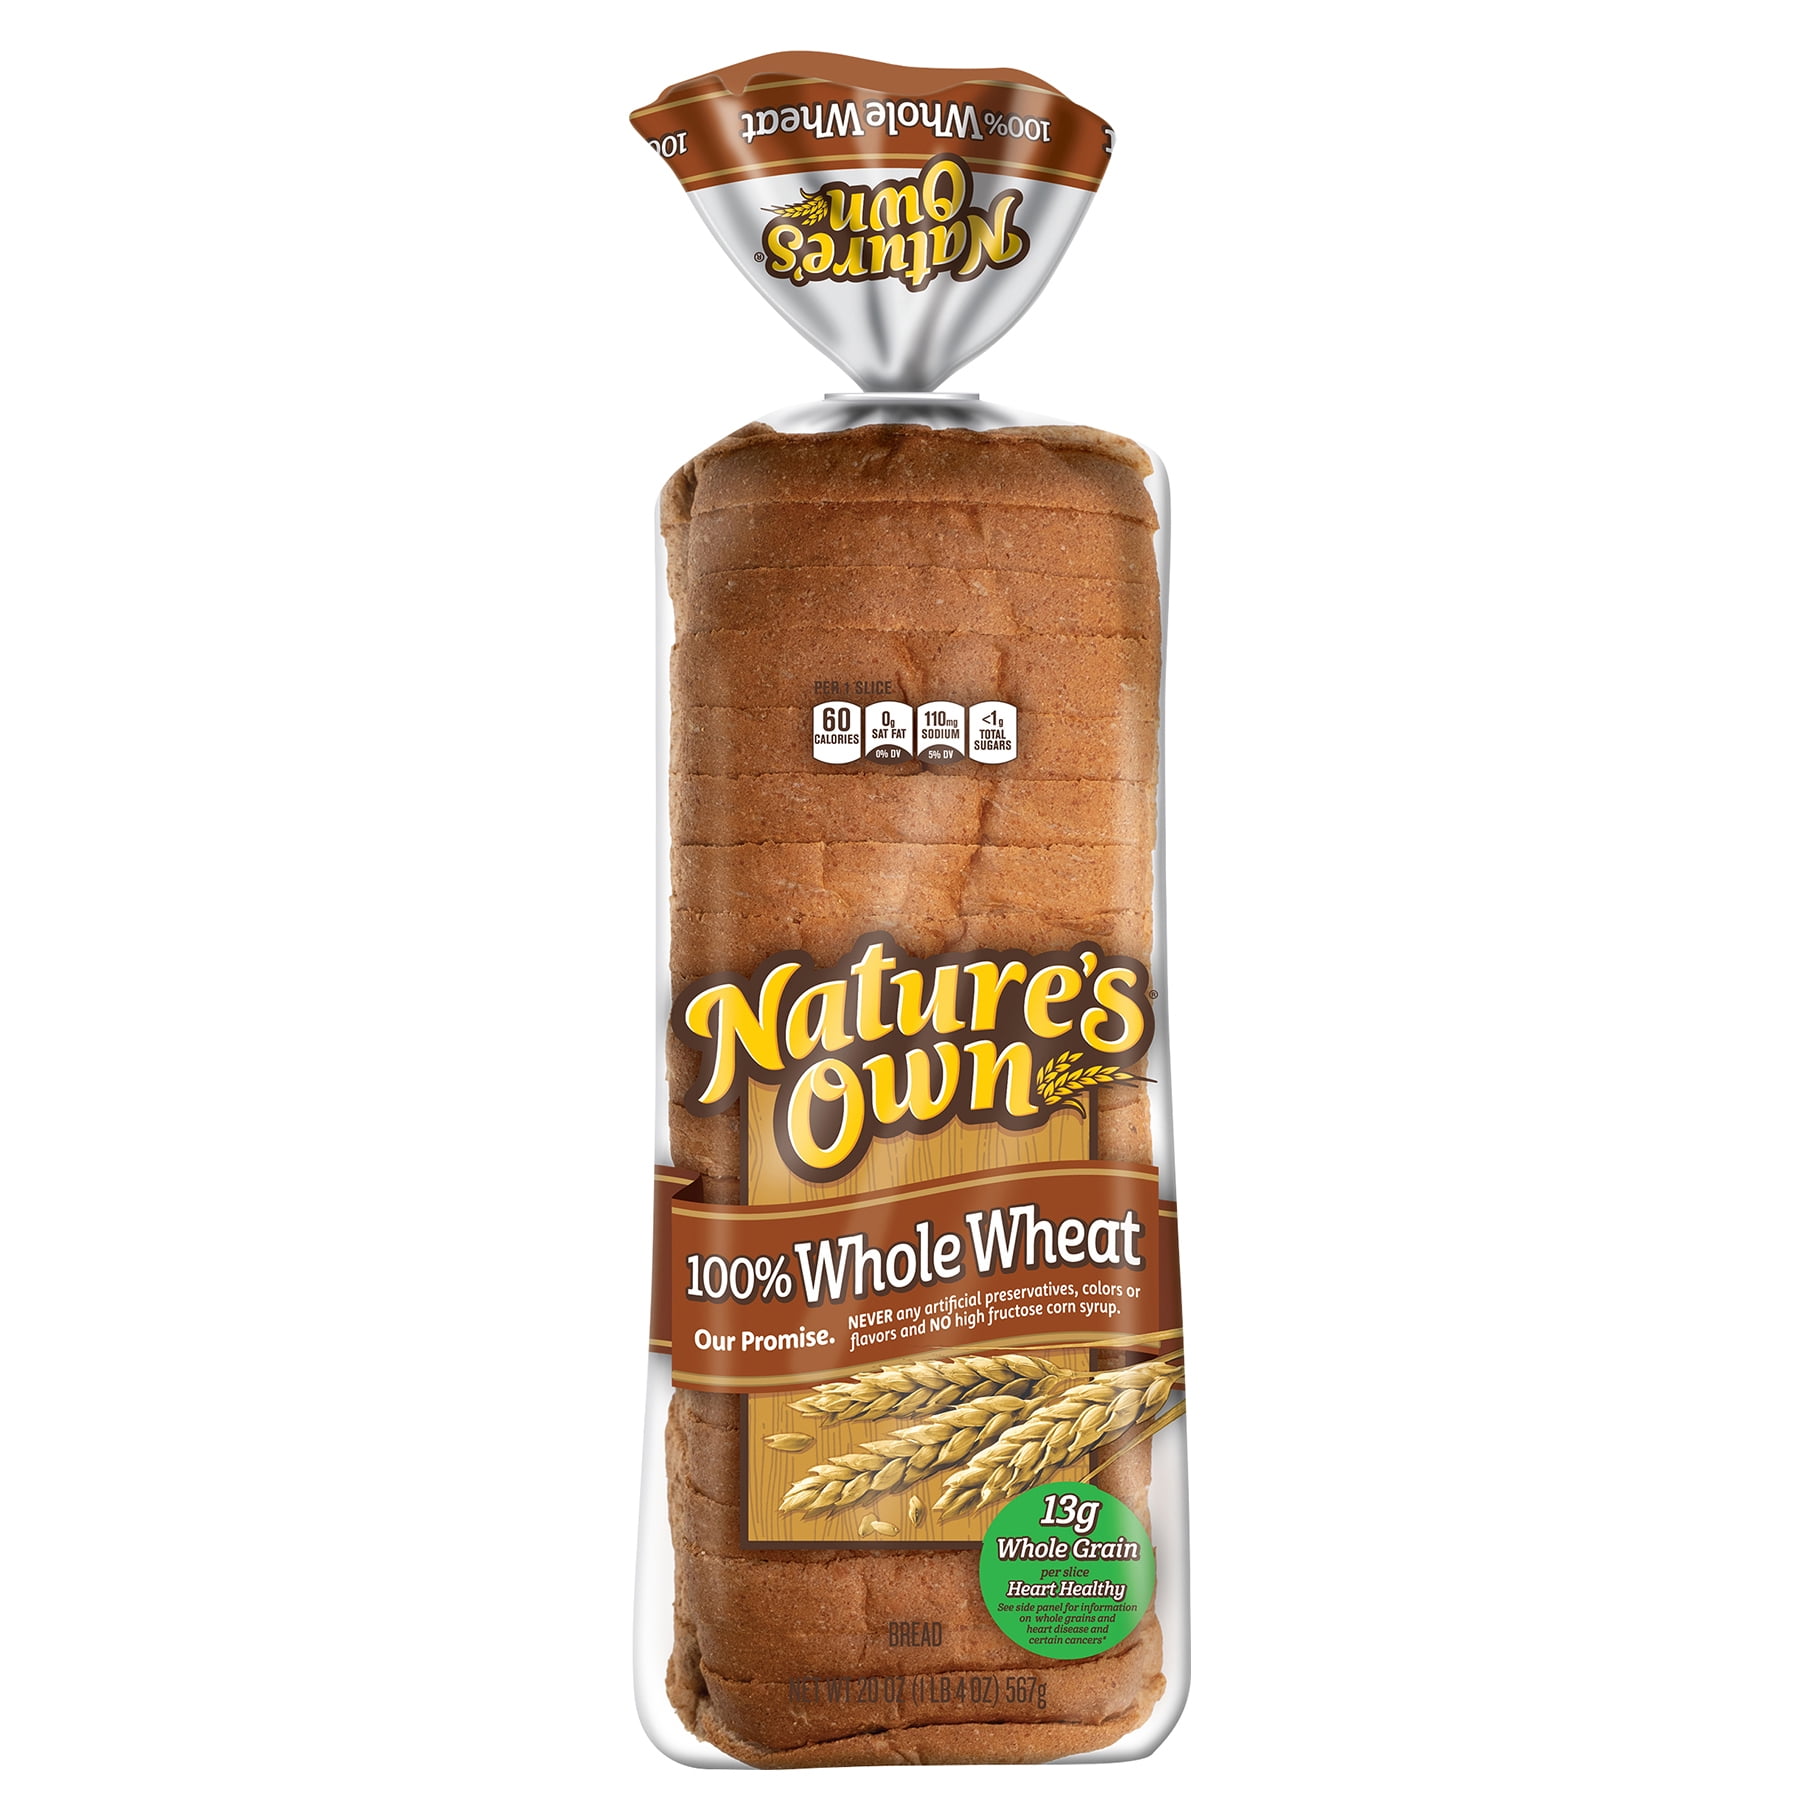 Nature's Own 100% Whole Wheat Bread 20 oz. Loaf